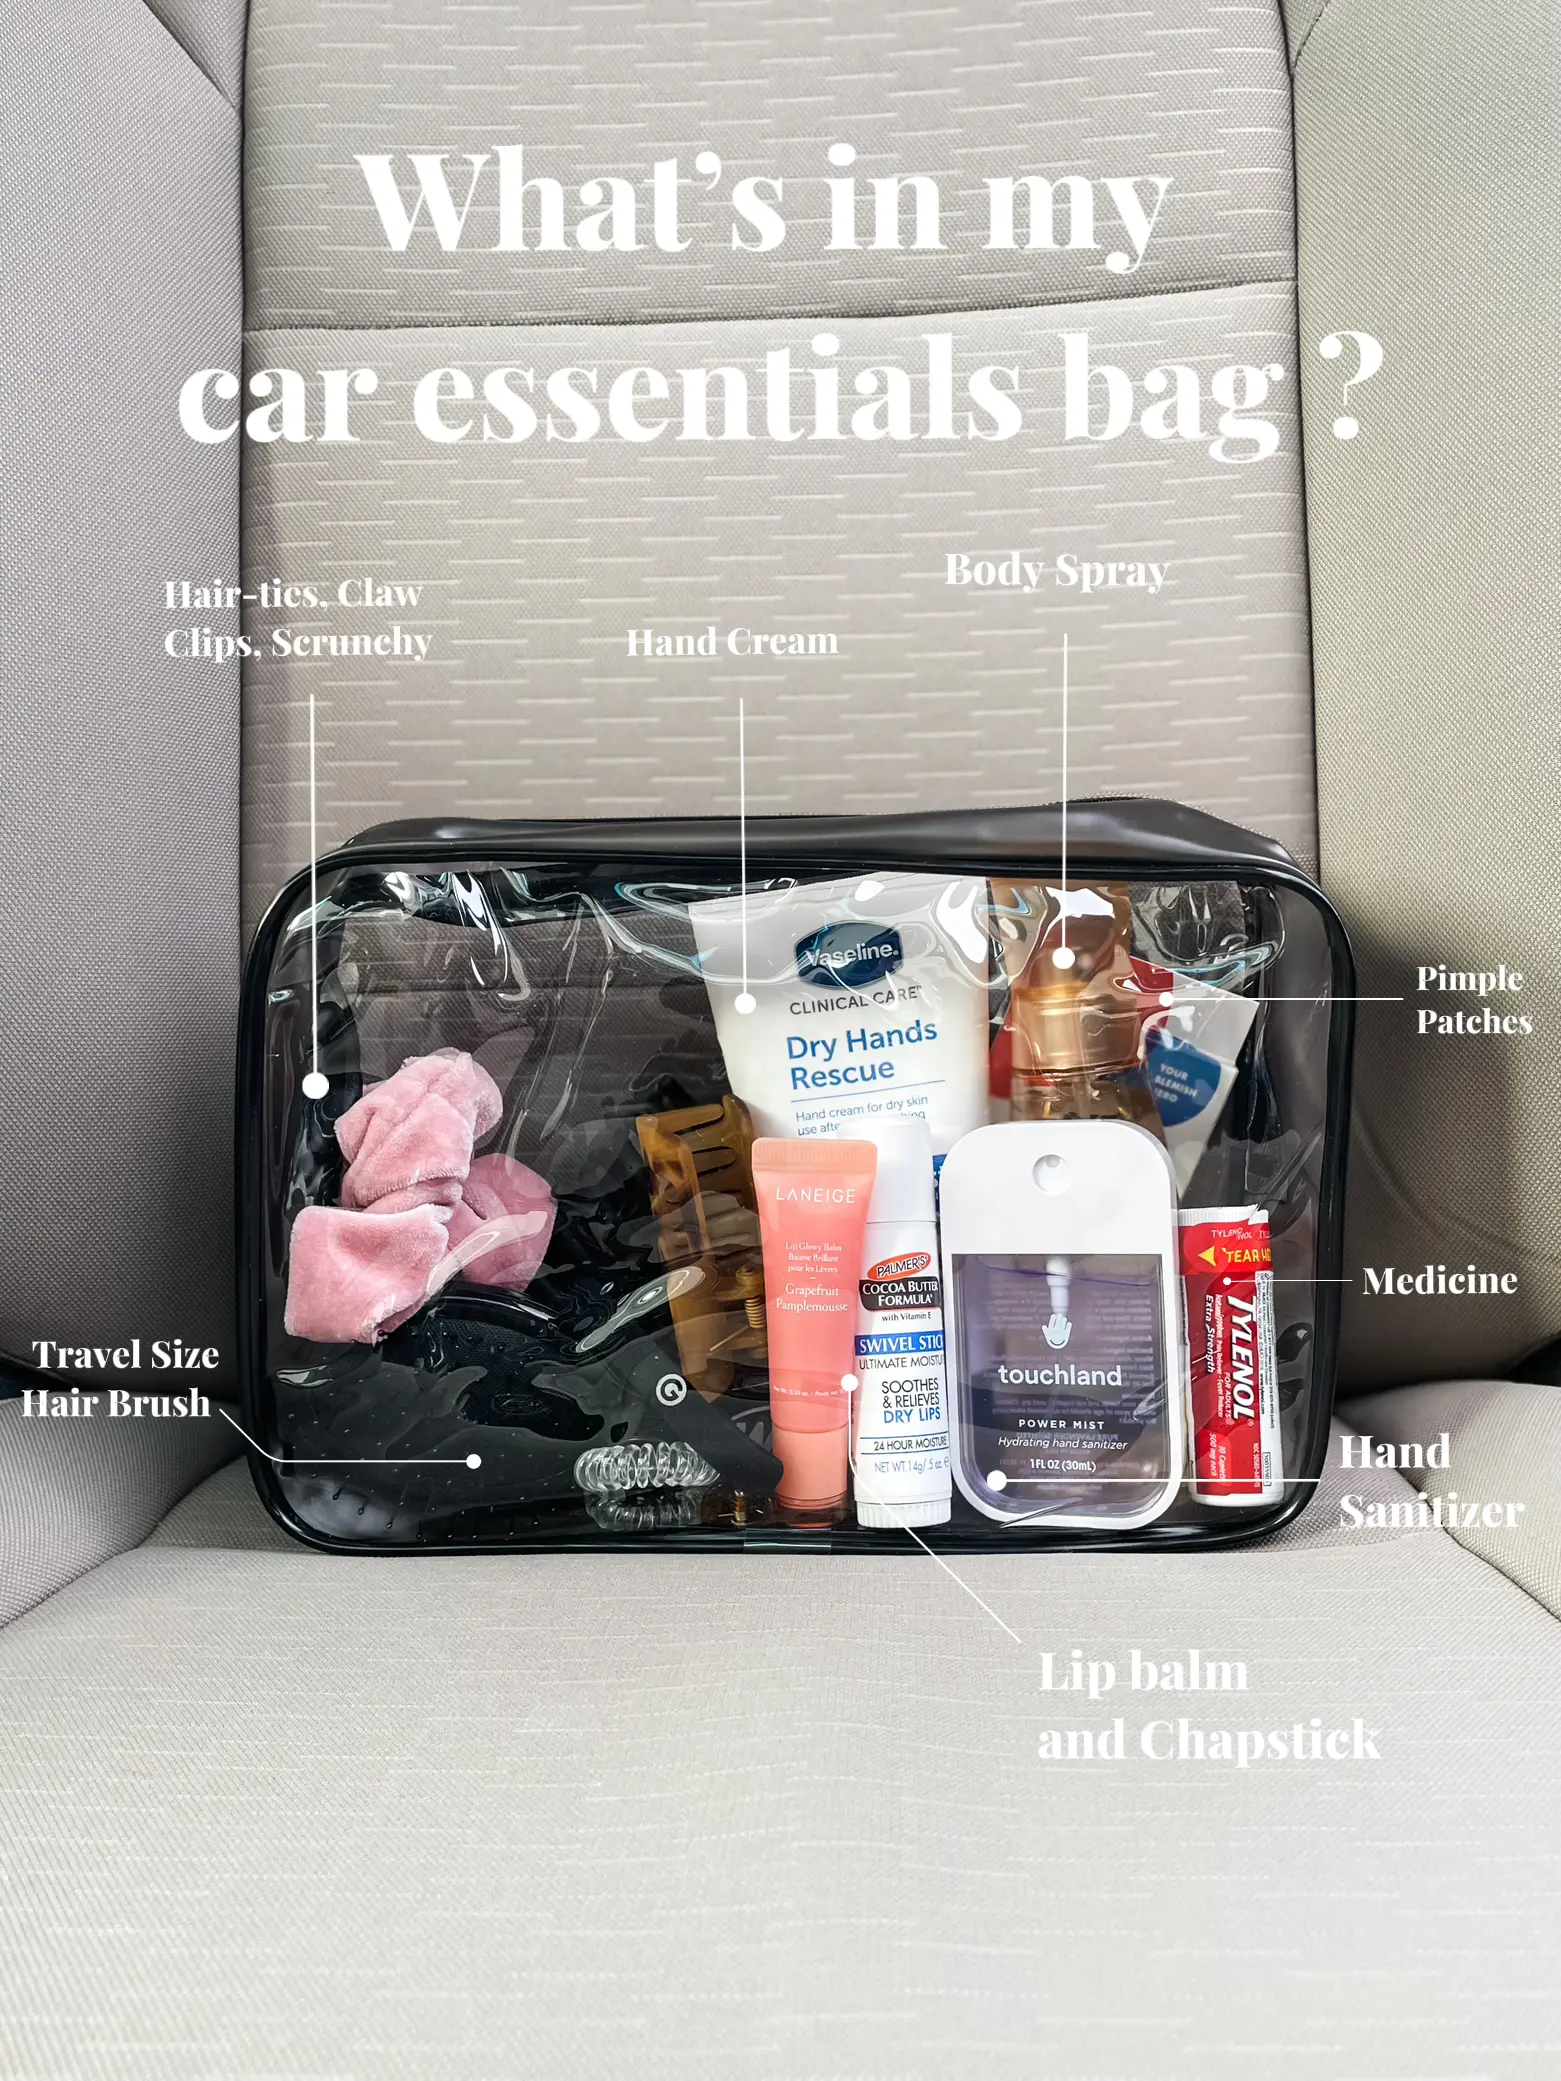 What's in my car essentials bag ?, Gallery posted by Kel